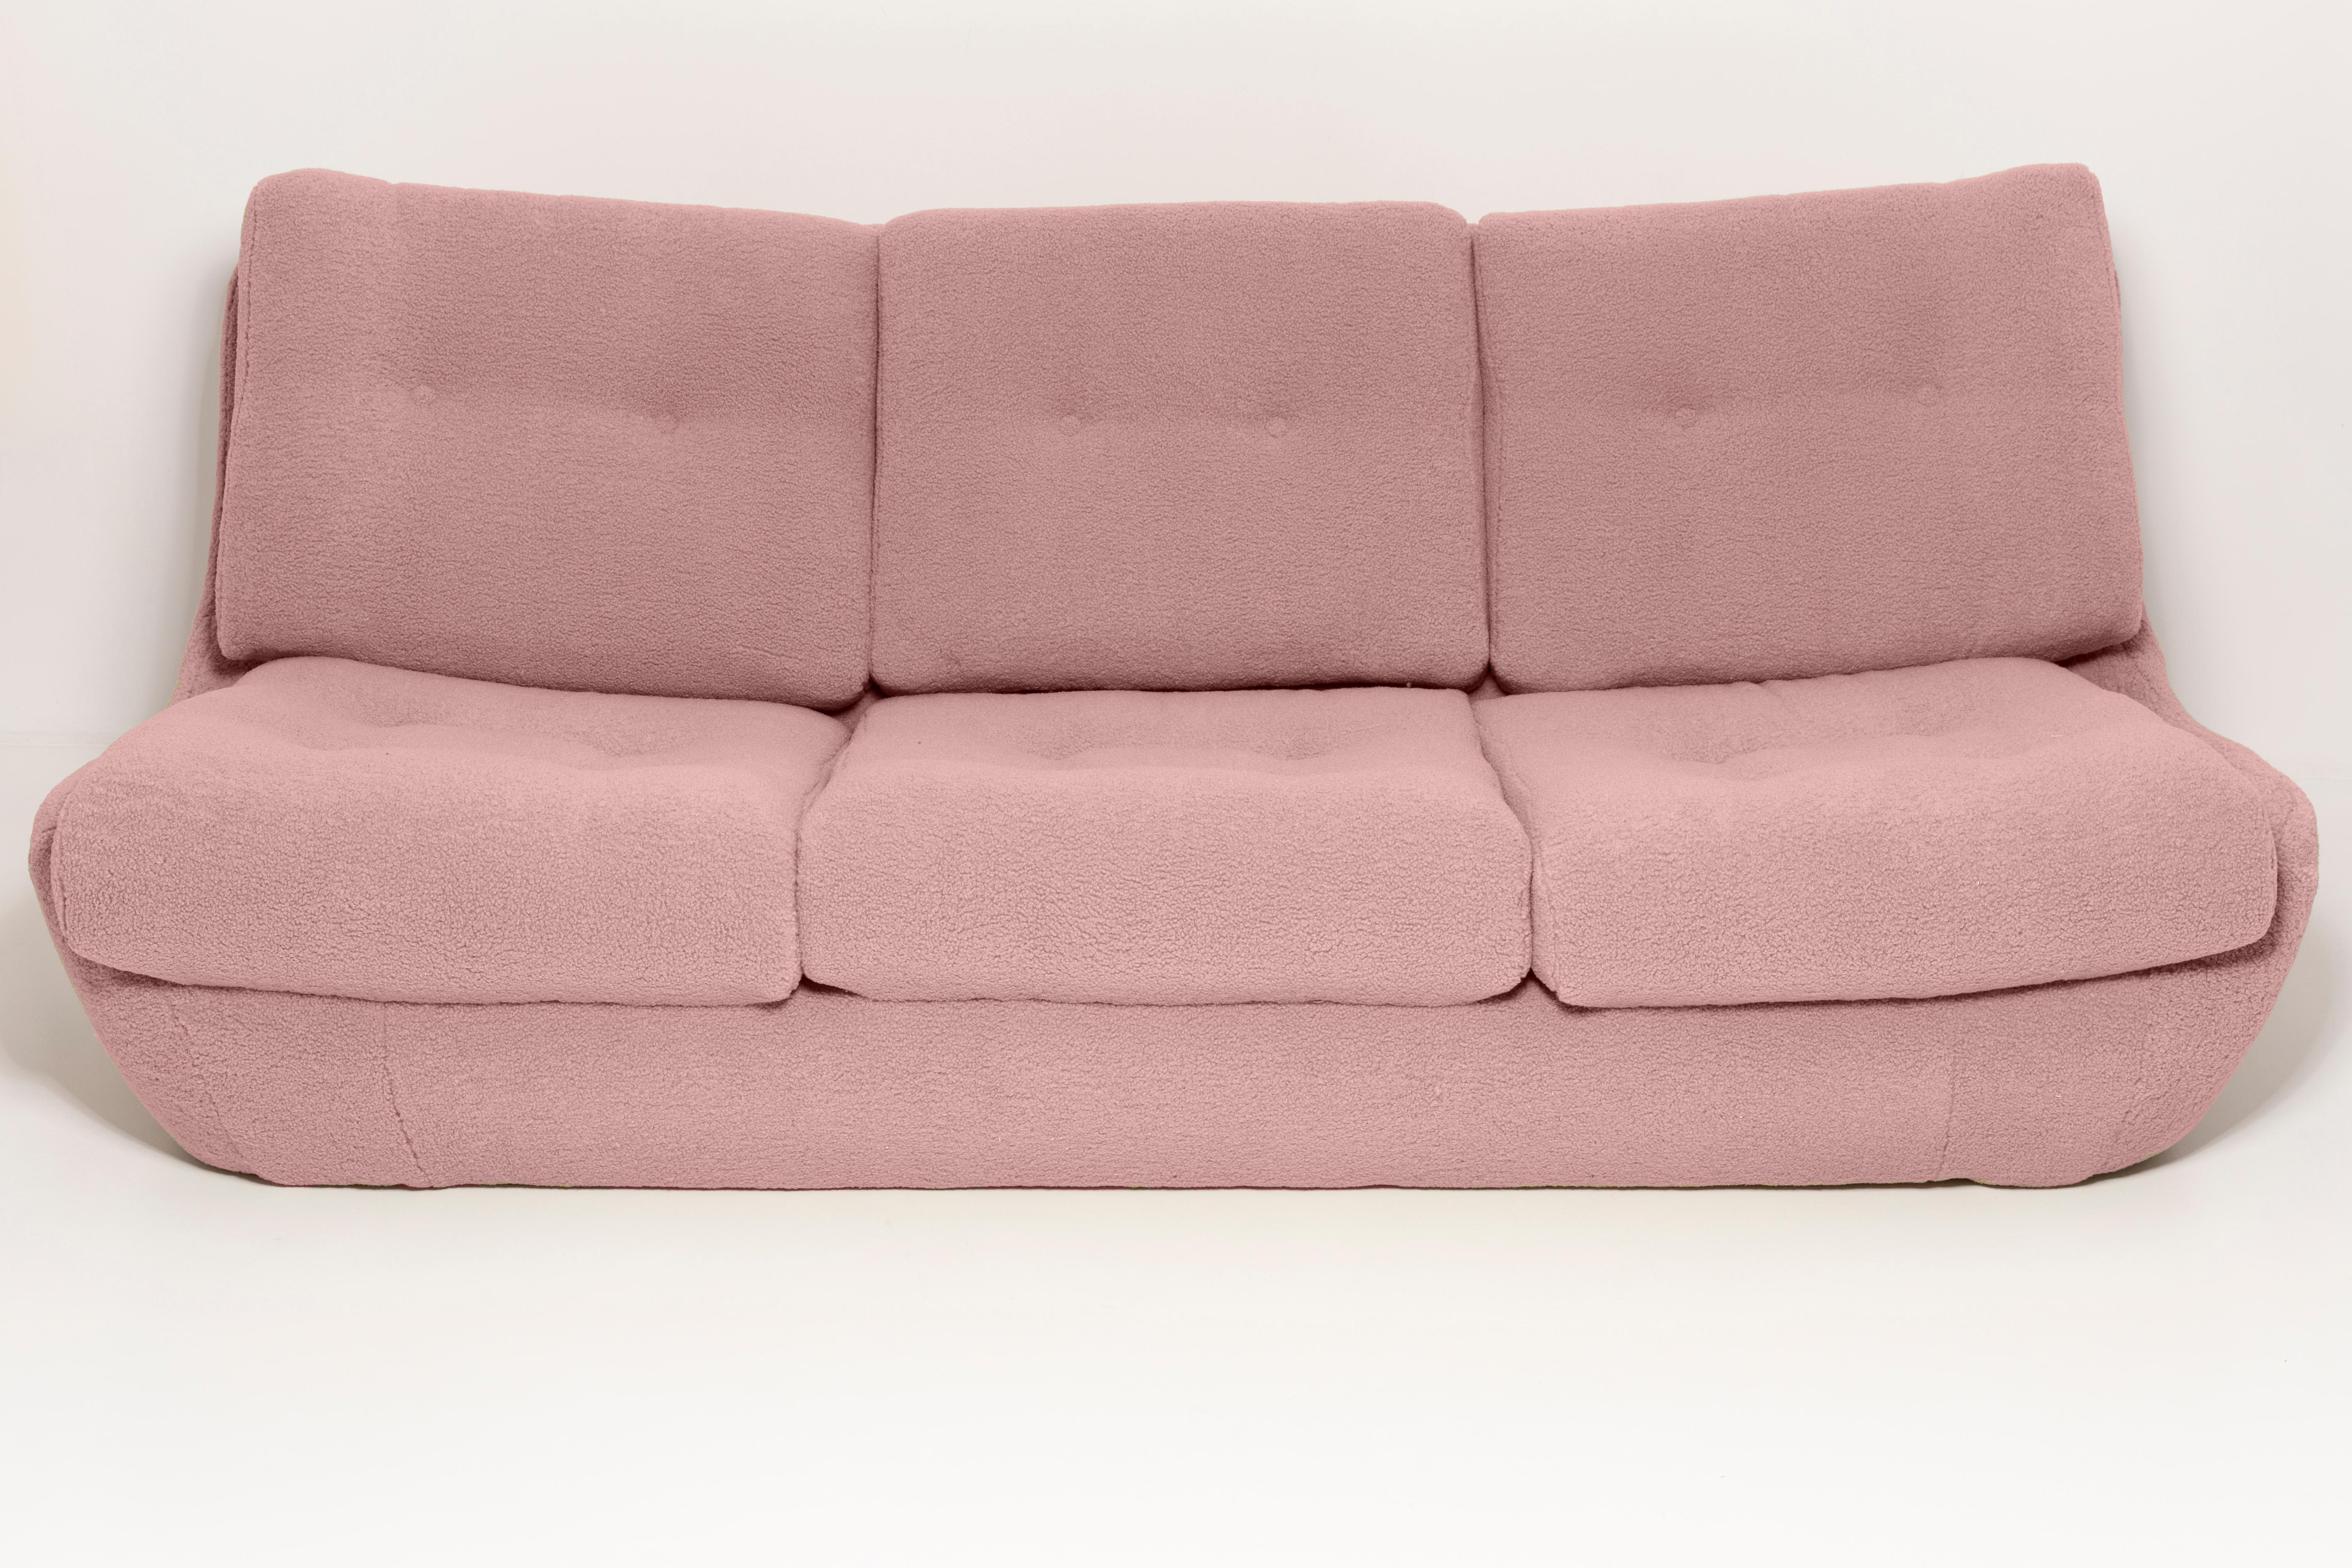 Atlantis sofa from the 1960s, produced in Czech Republic - at the moment they are unique. Due to their dimensions, they perfectly blend in even in small apartments providing comfort and beautiful decoration. Covered with high-quality pink blush